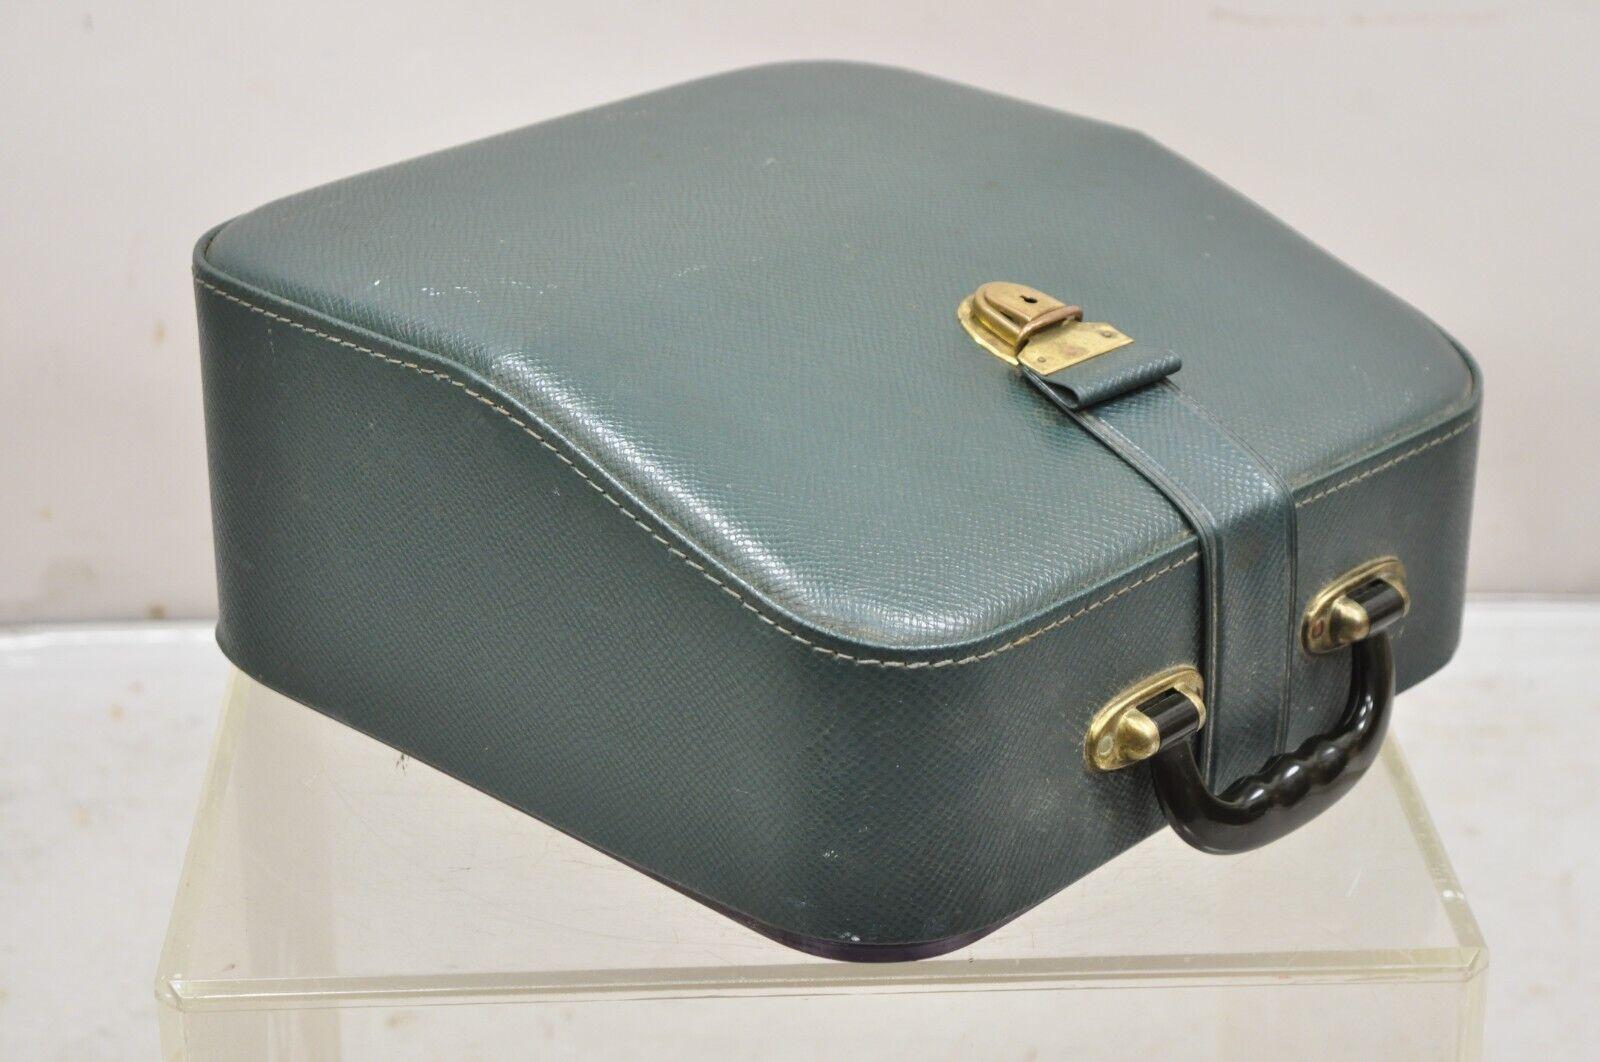 Vintage Hermes 2000 by Paillard Manual Typewriter with Green Carrying Case. Circa 1960s. Measurements: 6